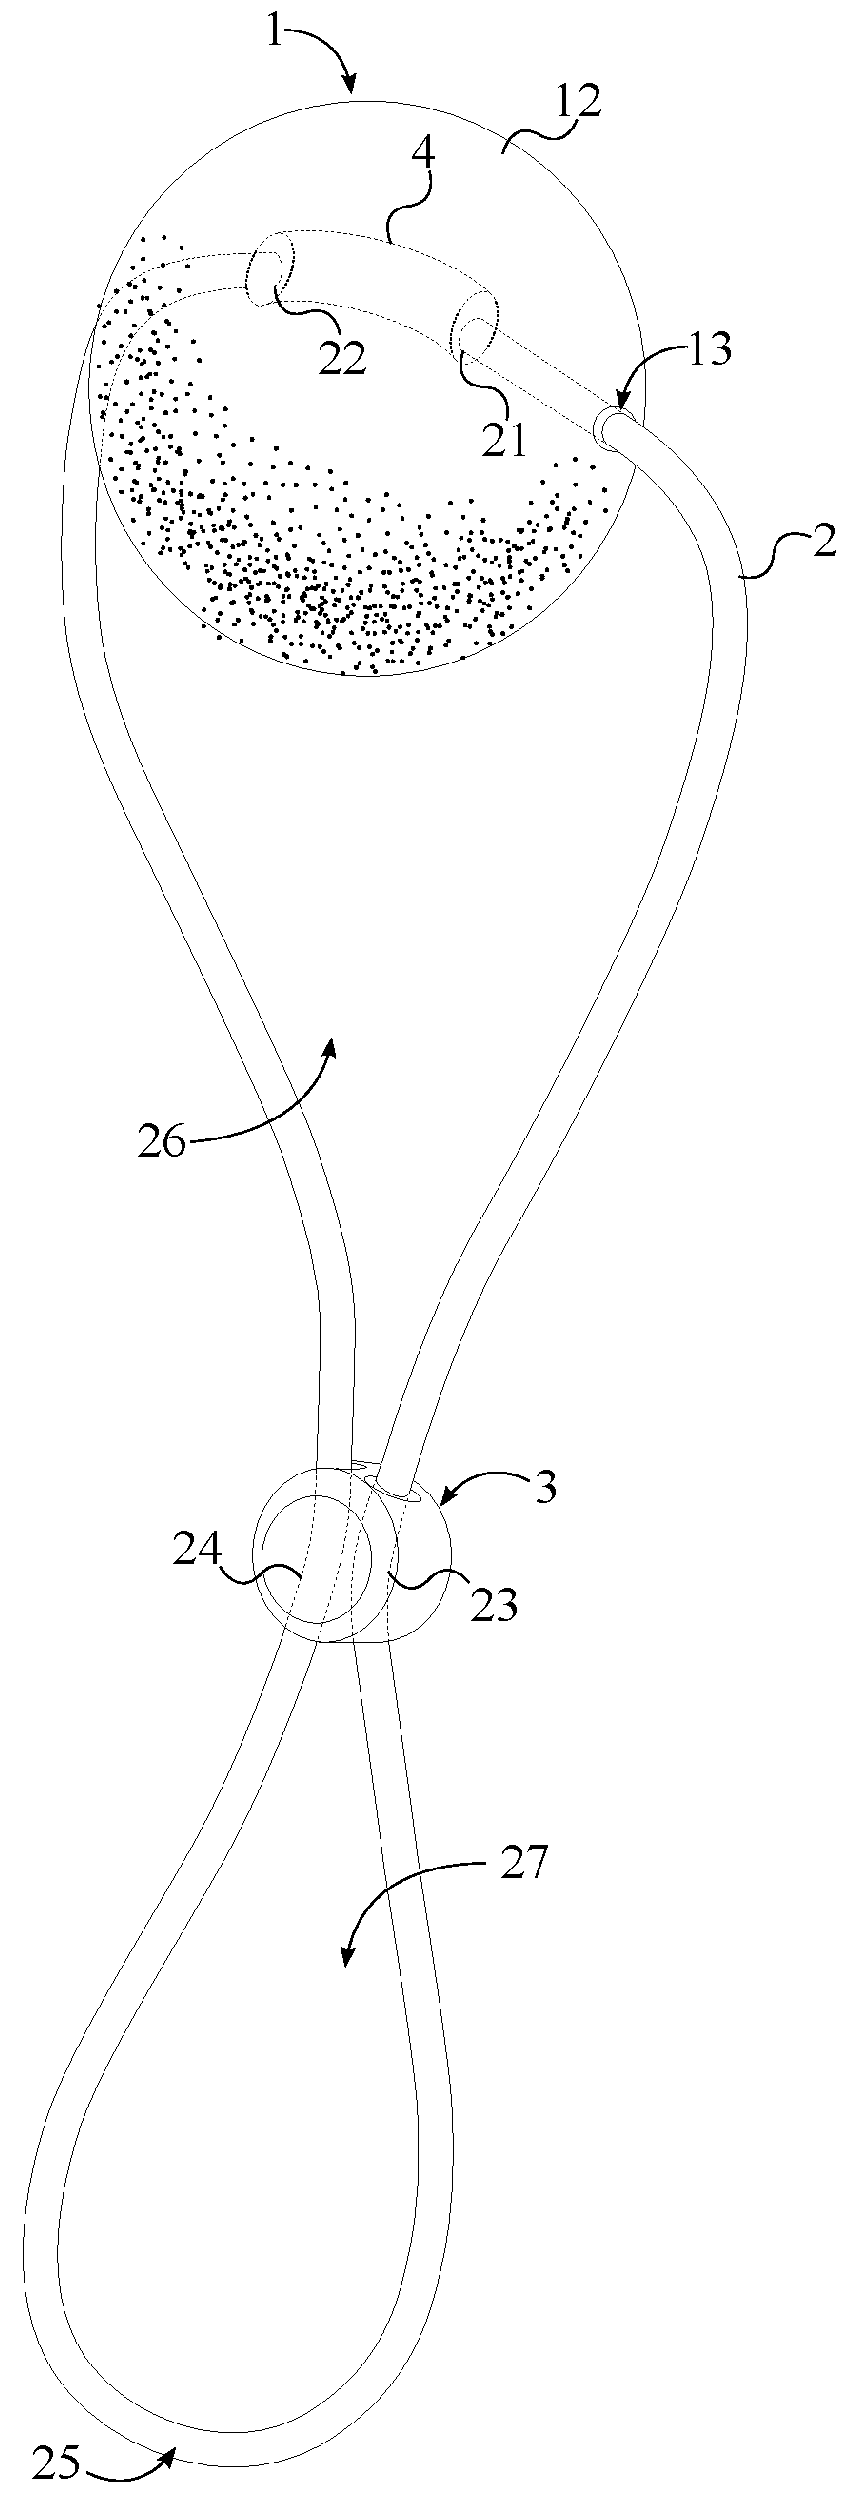 Tethered Physically-Therapeutic Apparatus with an Adjustable Flexible Cord